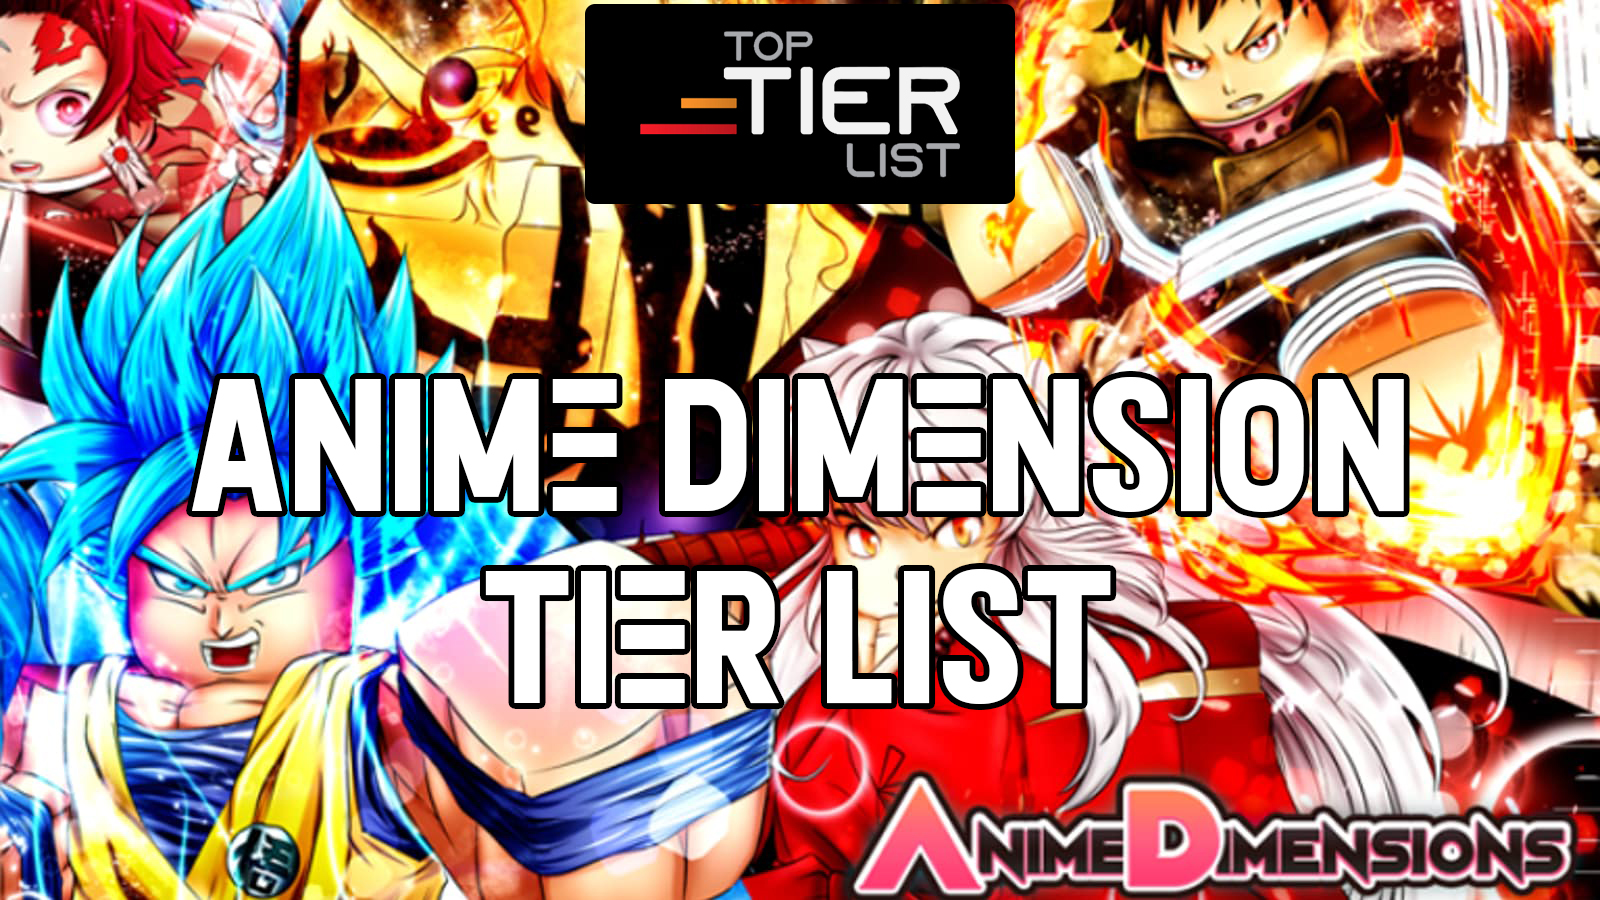 the best characters to get tier list anime dimensionsTikTok Search